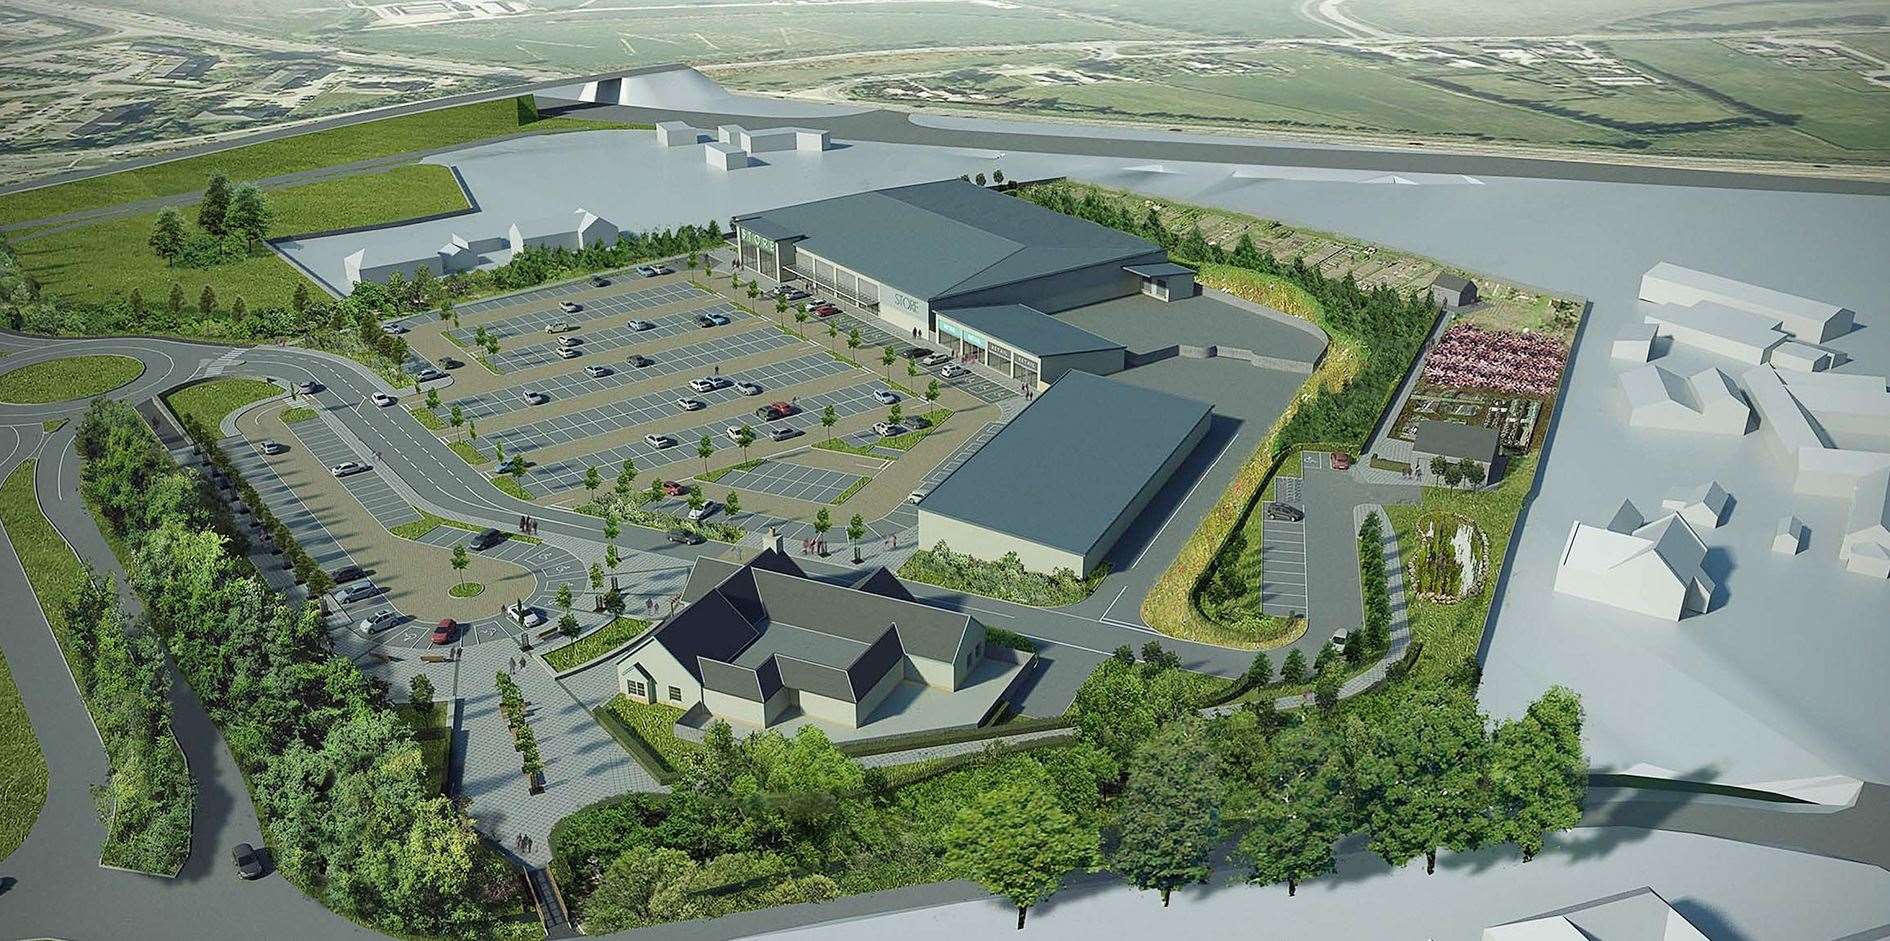 A major expansion is planned at Inshes Retail Park in Inverness.